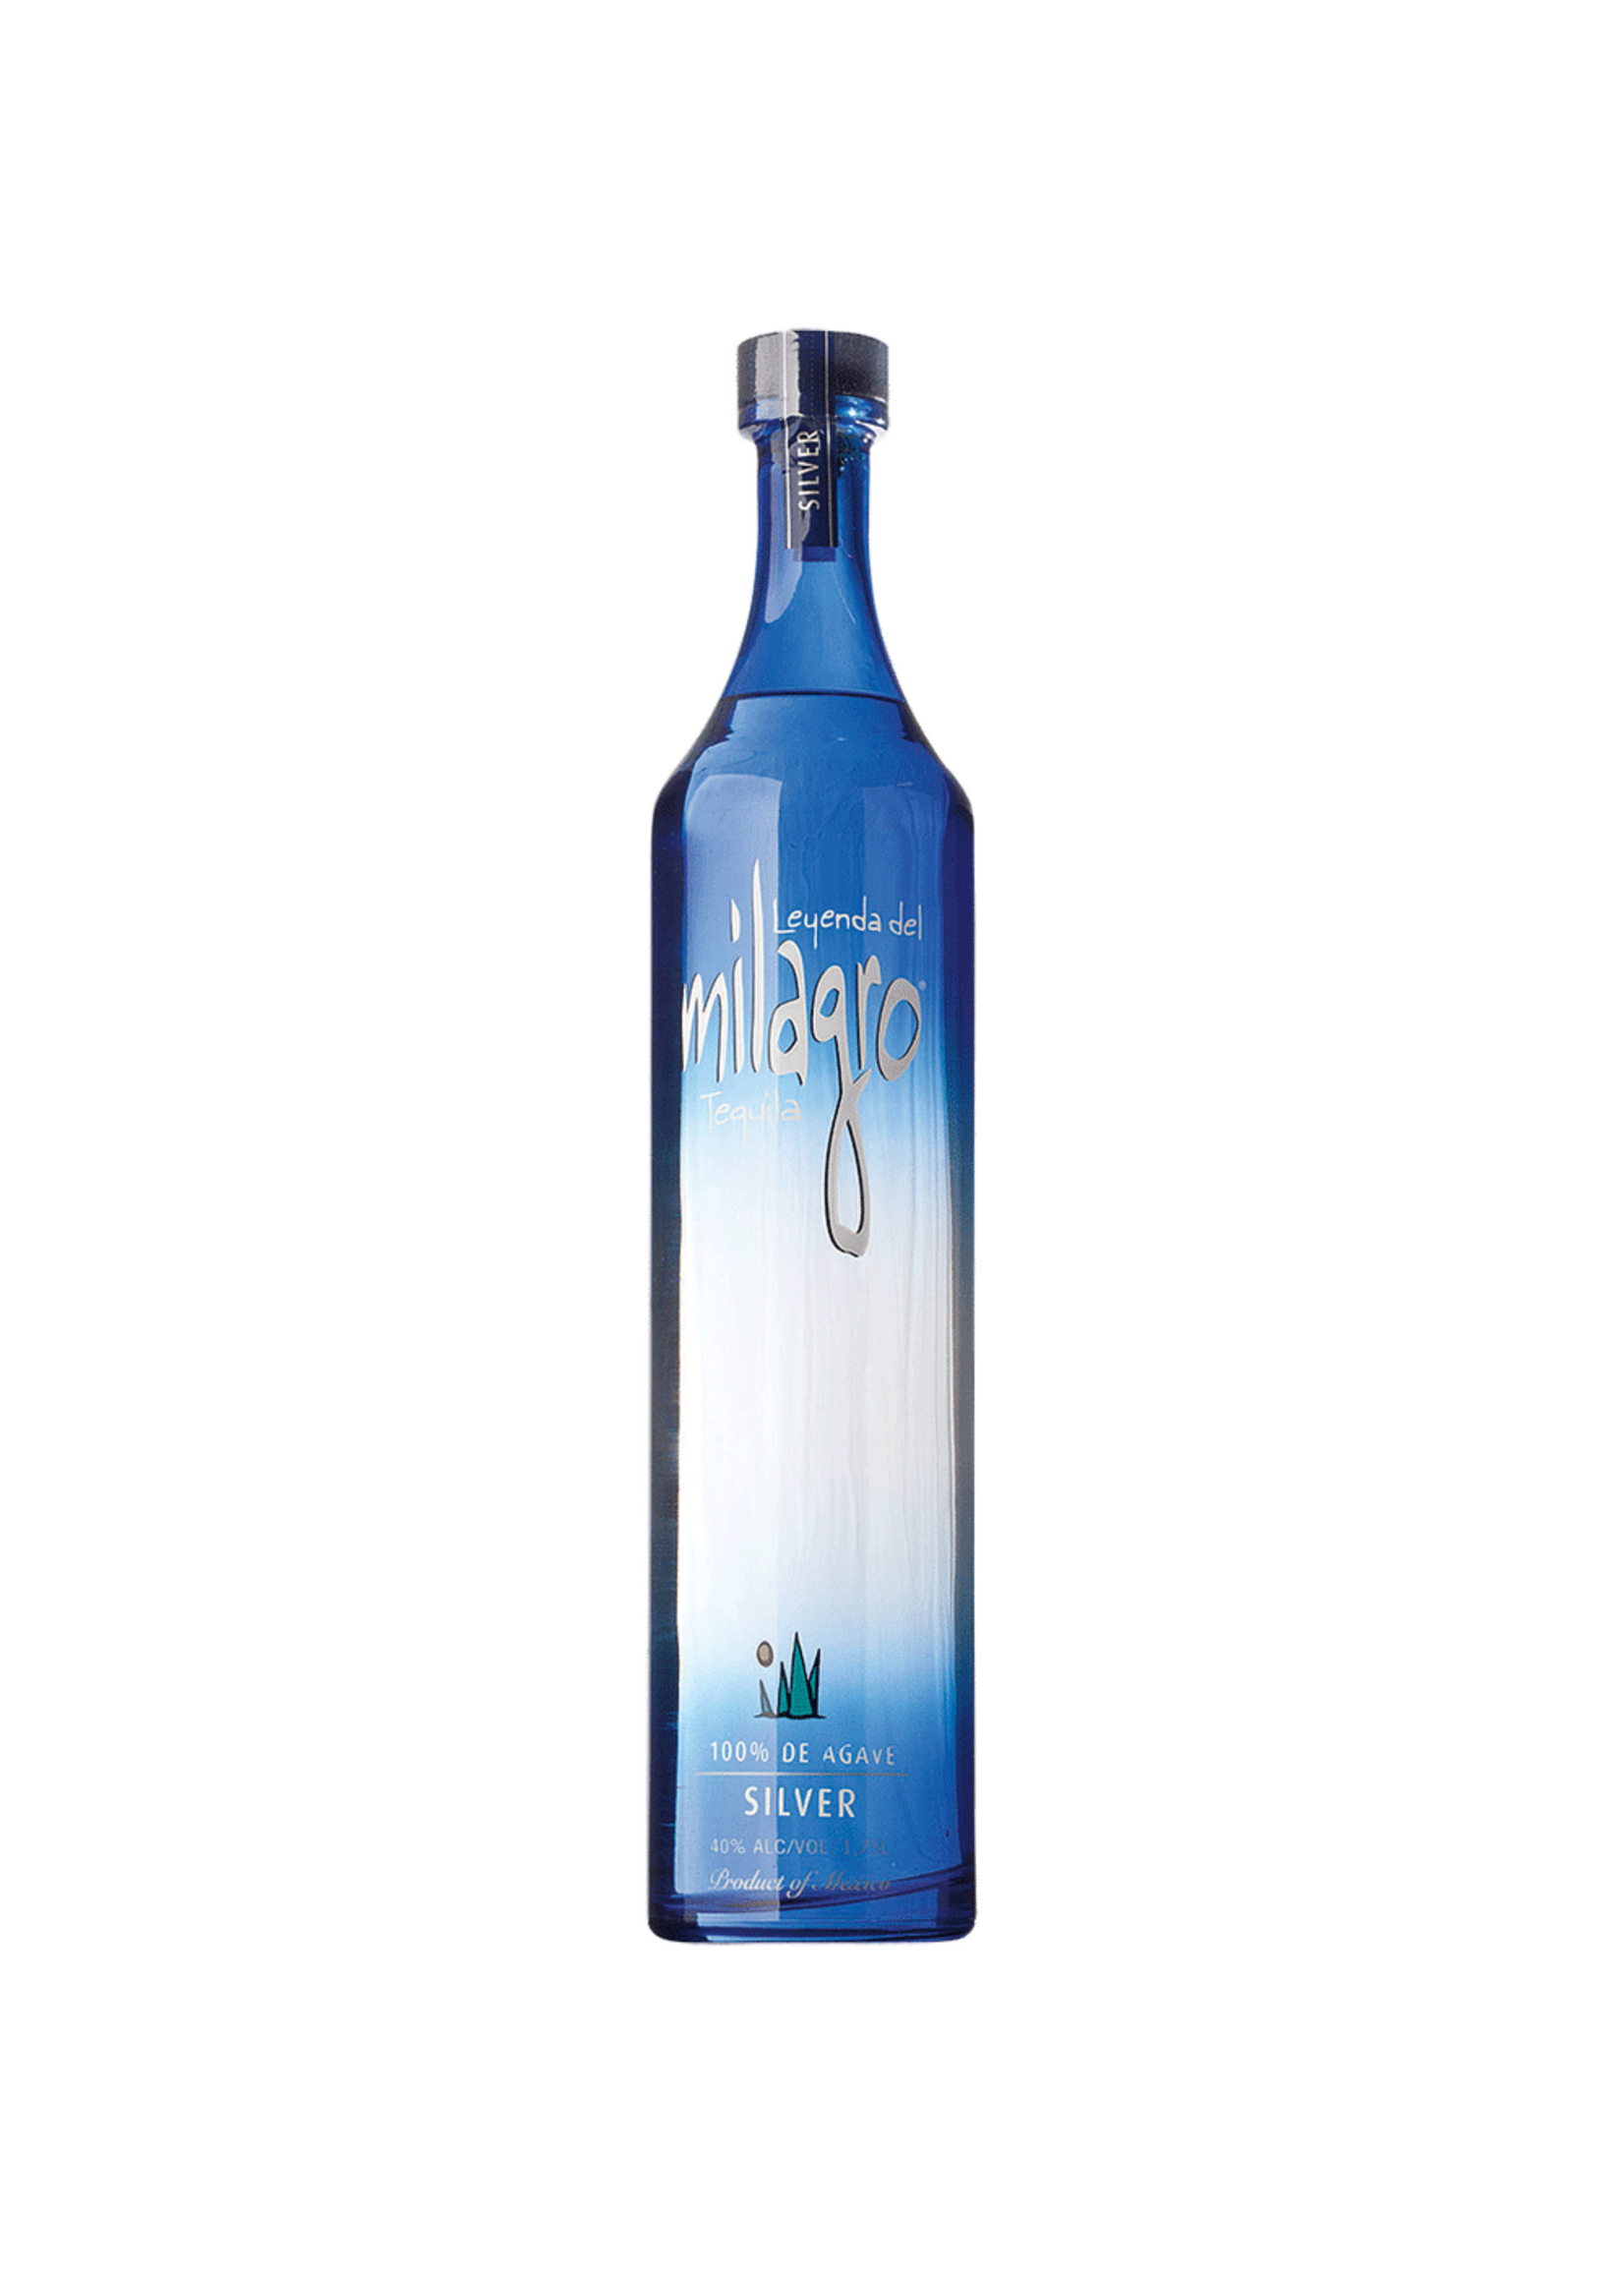 Milagro Silver Tequila 80Proof 1.75Ltr